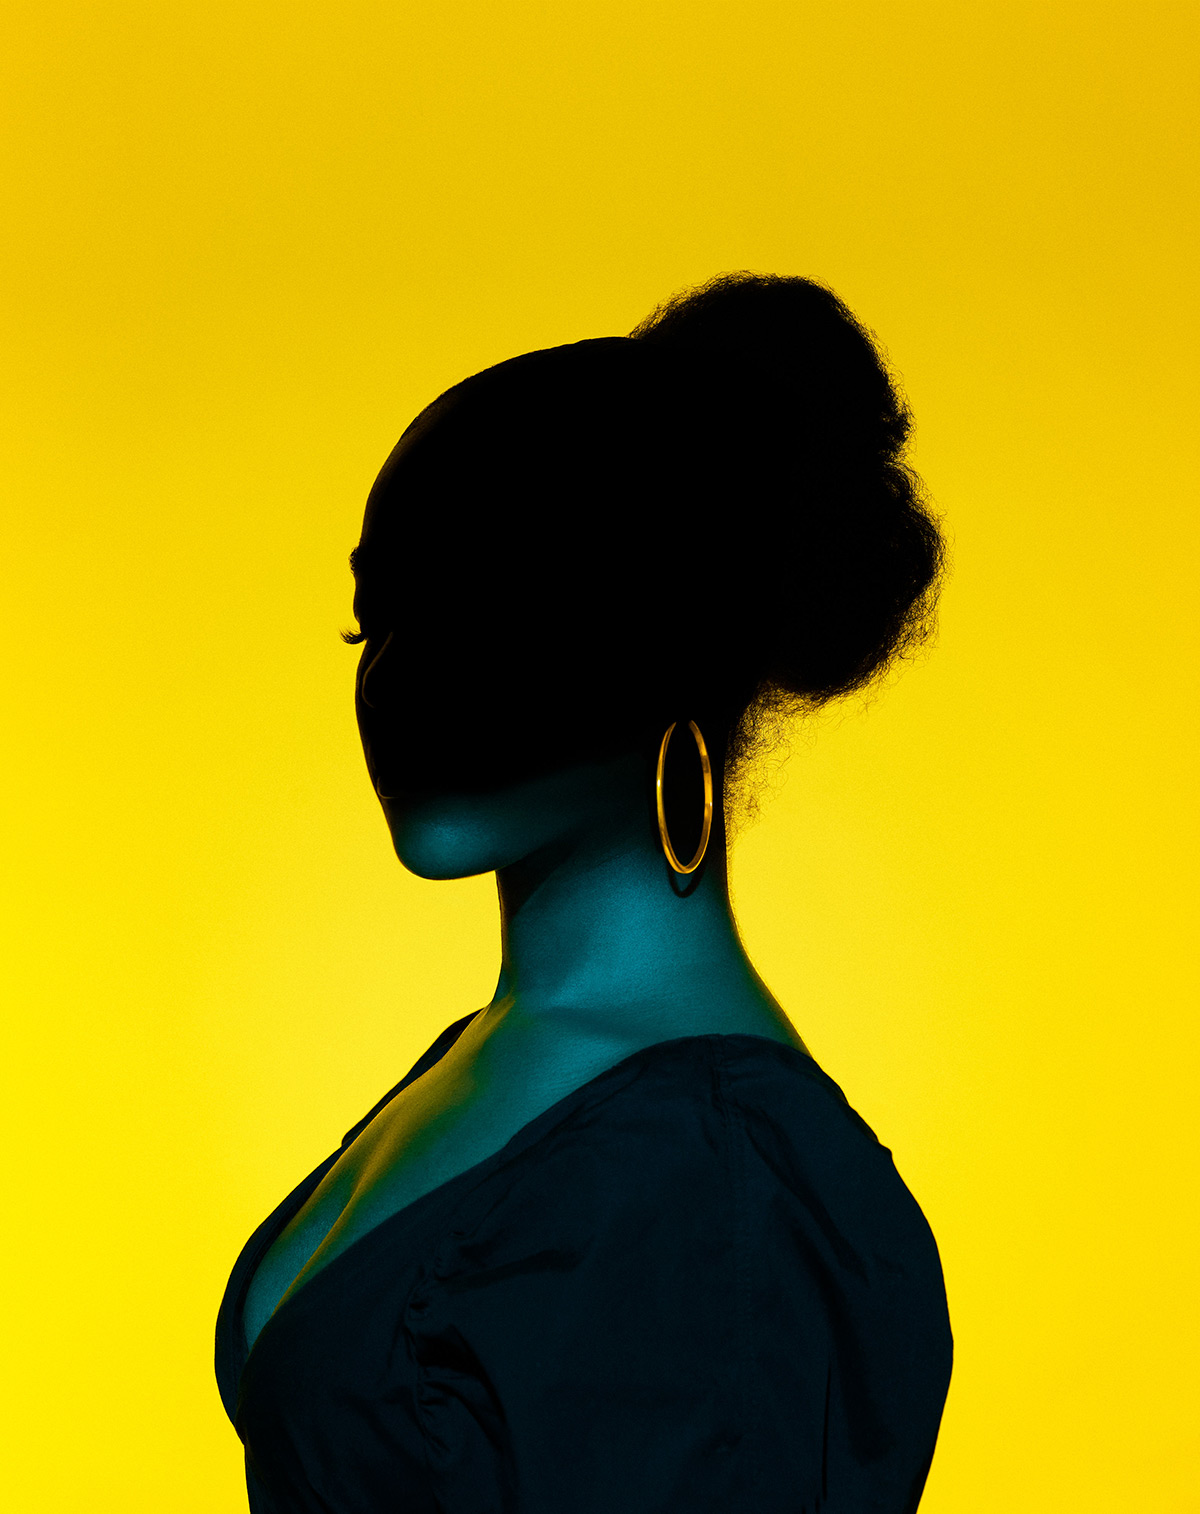 A photo of Keisha the Sket author Jade LB against a yellow backdrop, her face in shadows.